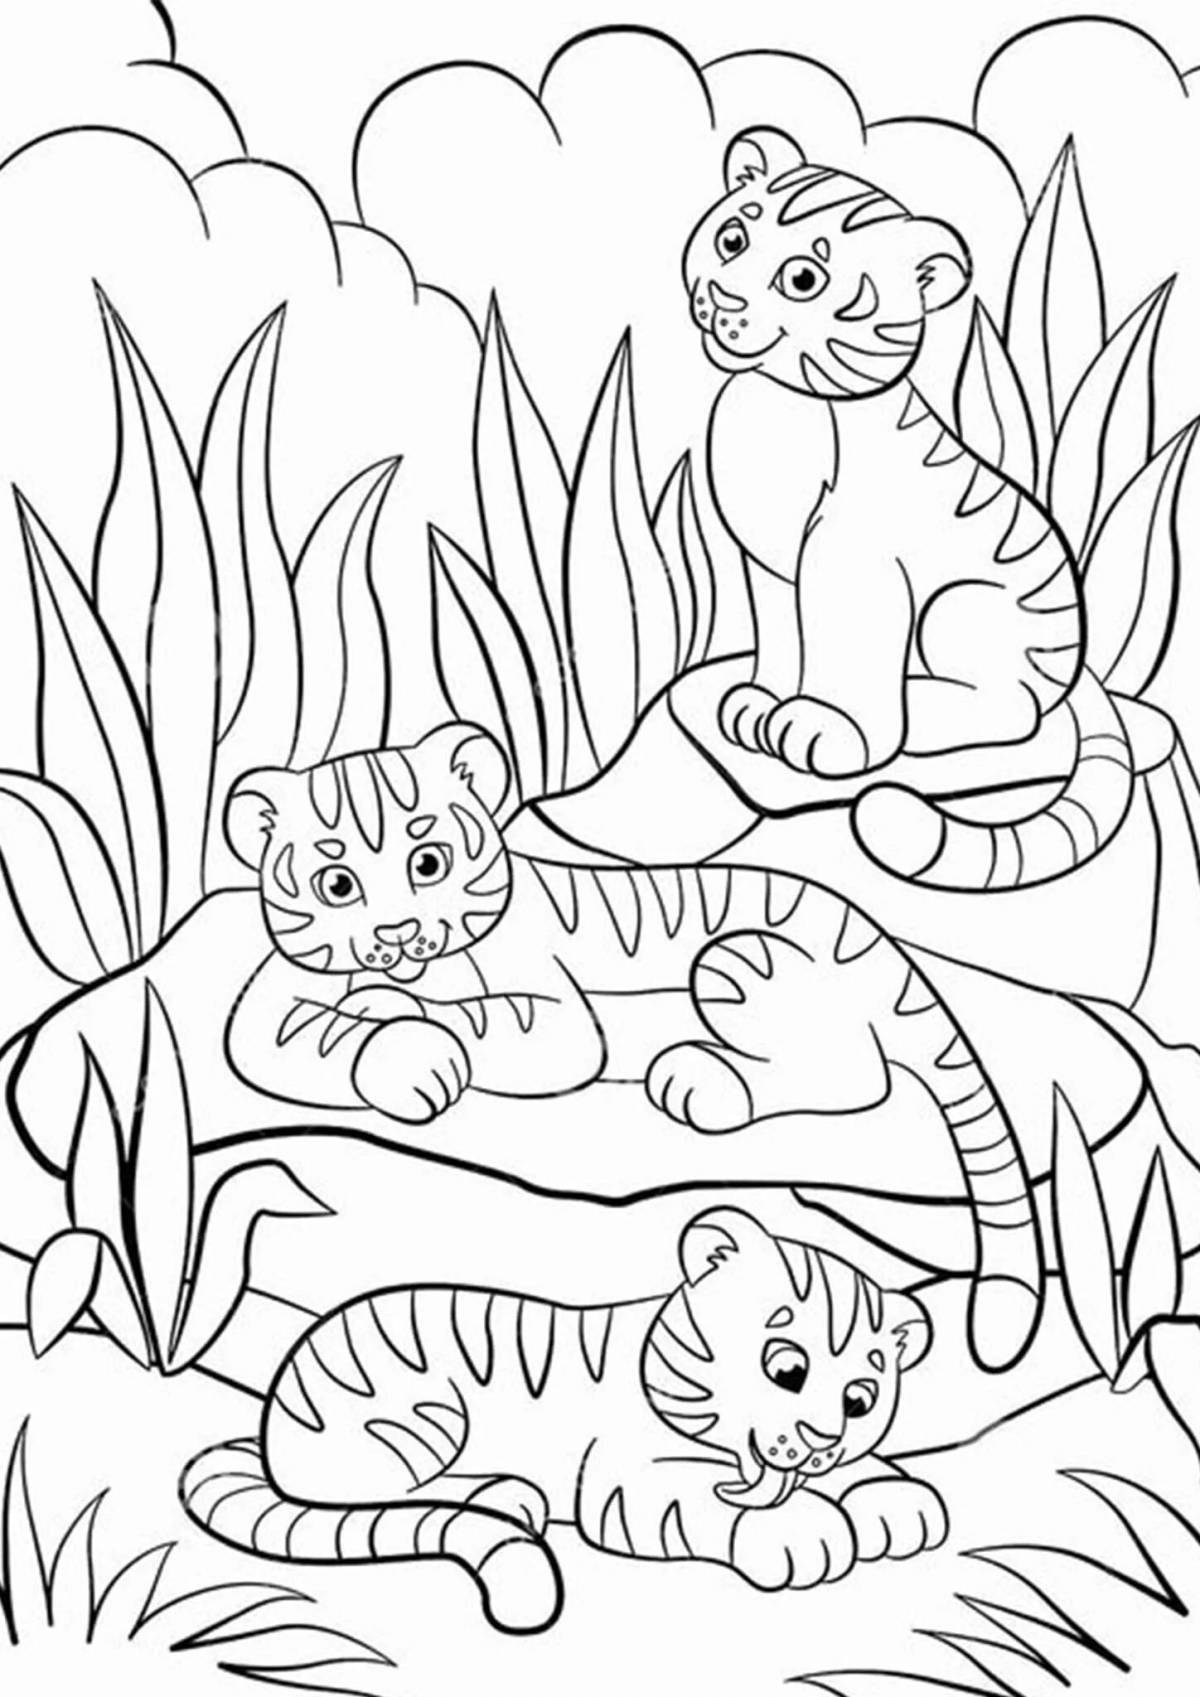 Playful tiger family coloring page